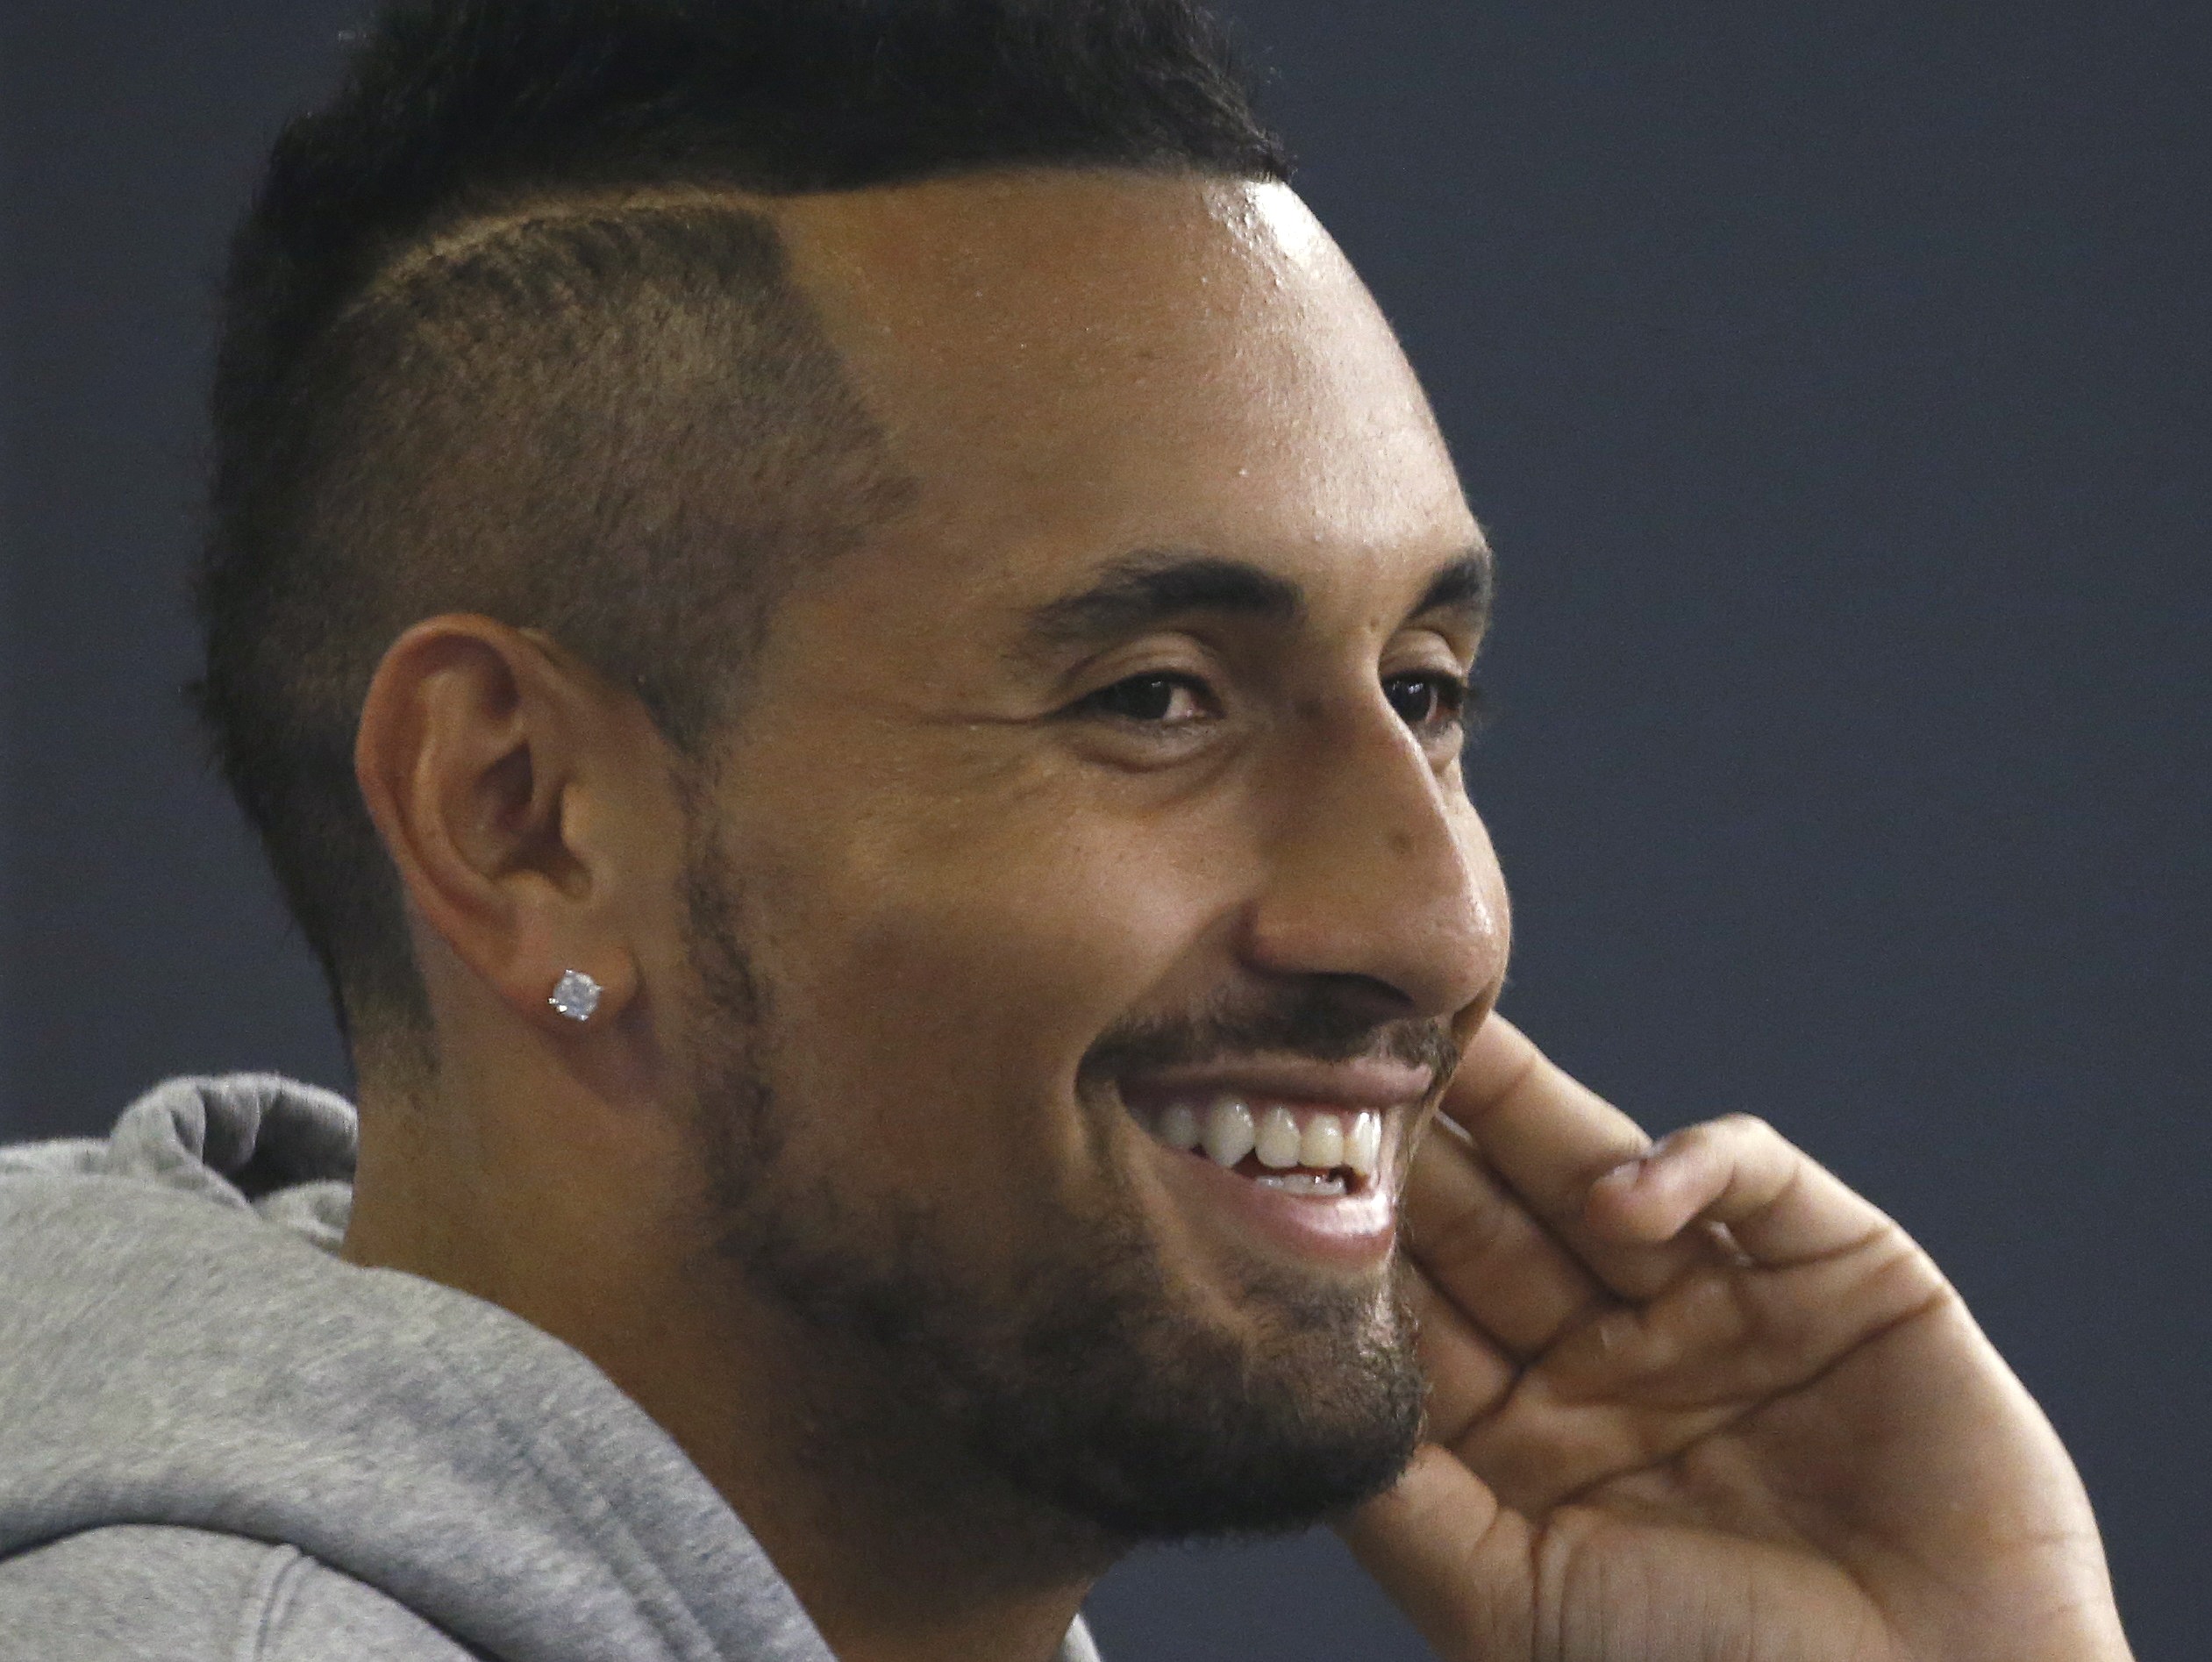 Tennis: Kyrgios can become global superstar, says Becker